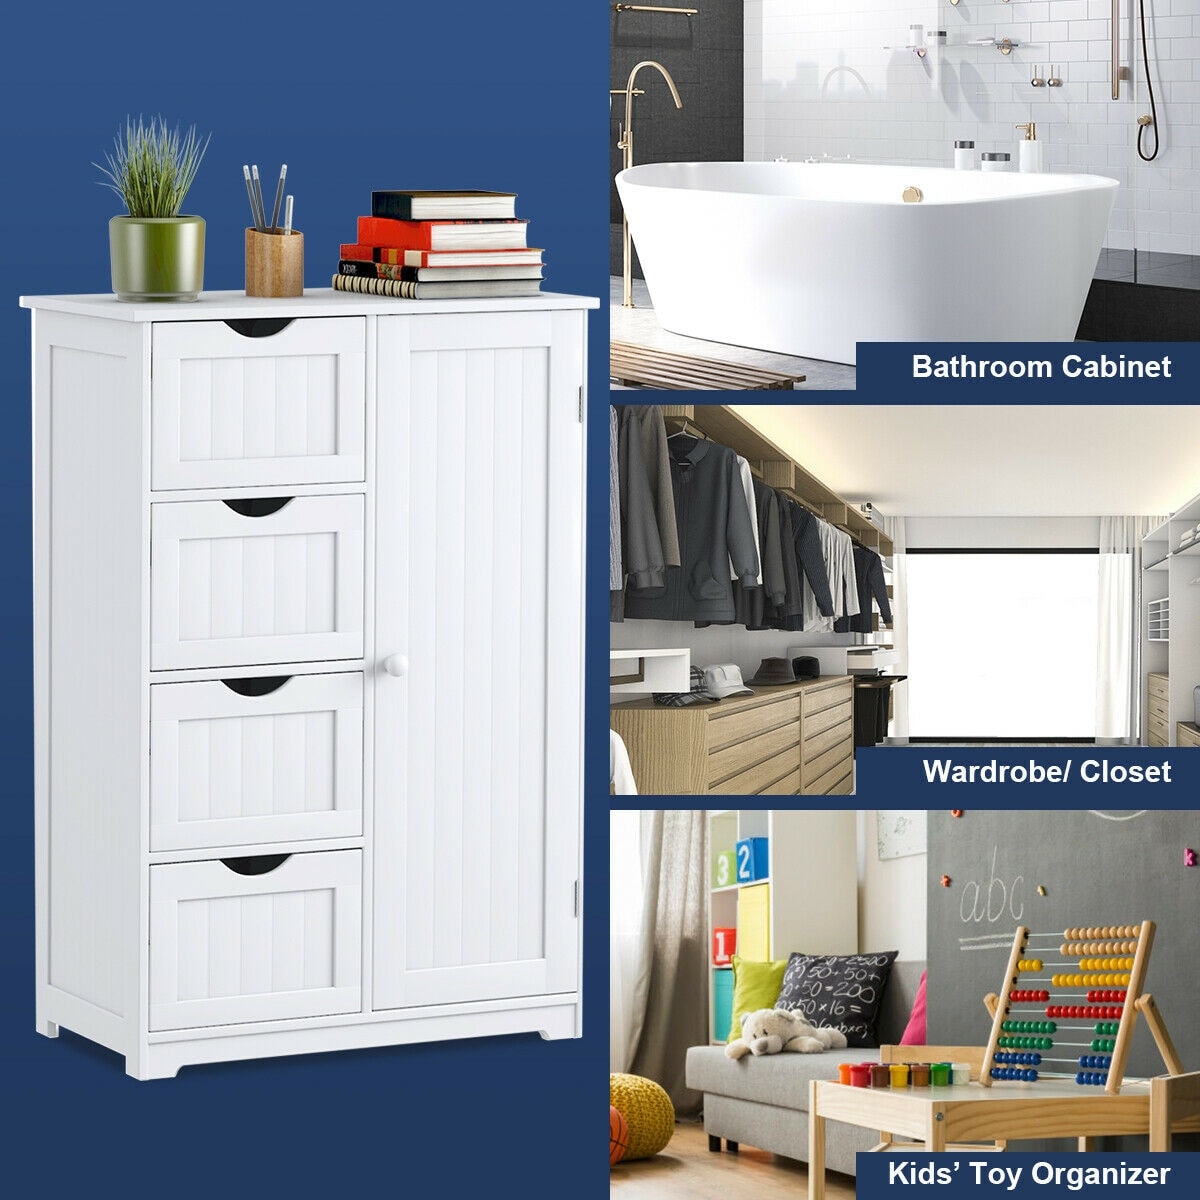 https://ak1.ostkcdn.com/images/products/is/images/direct/11349528883e81a49b43873f5a40fd2b16185d68/Costway-Wooden-4-Drawer-Bathroom-Cabinet-Storage-Cupboard-2-Shelves-Free-Standing-White.jpg